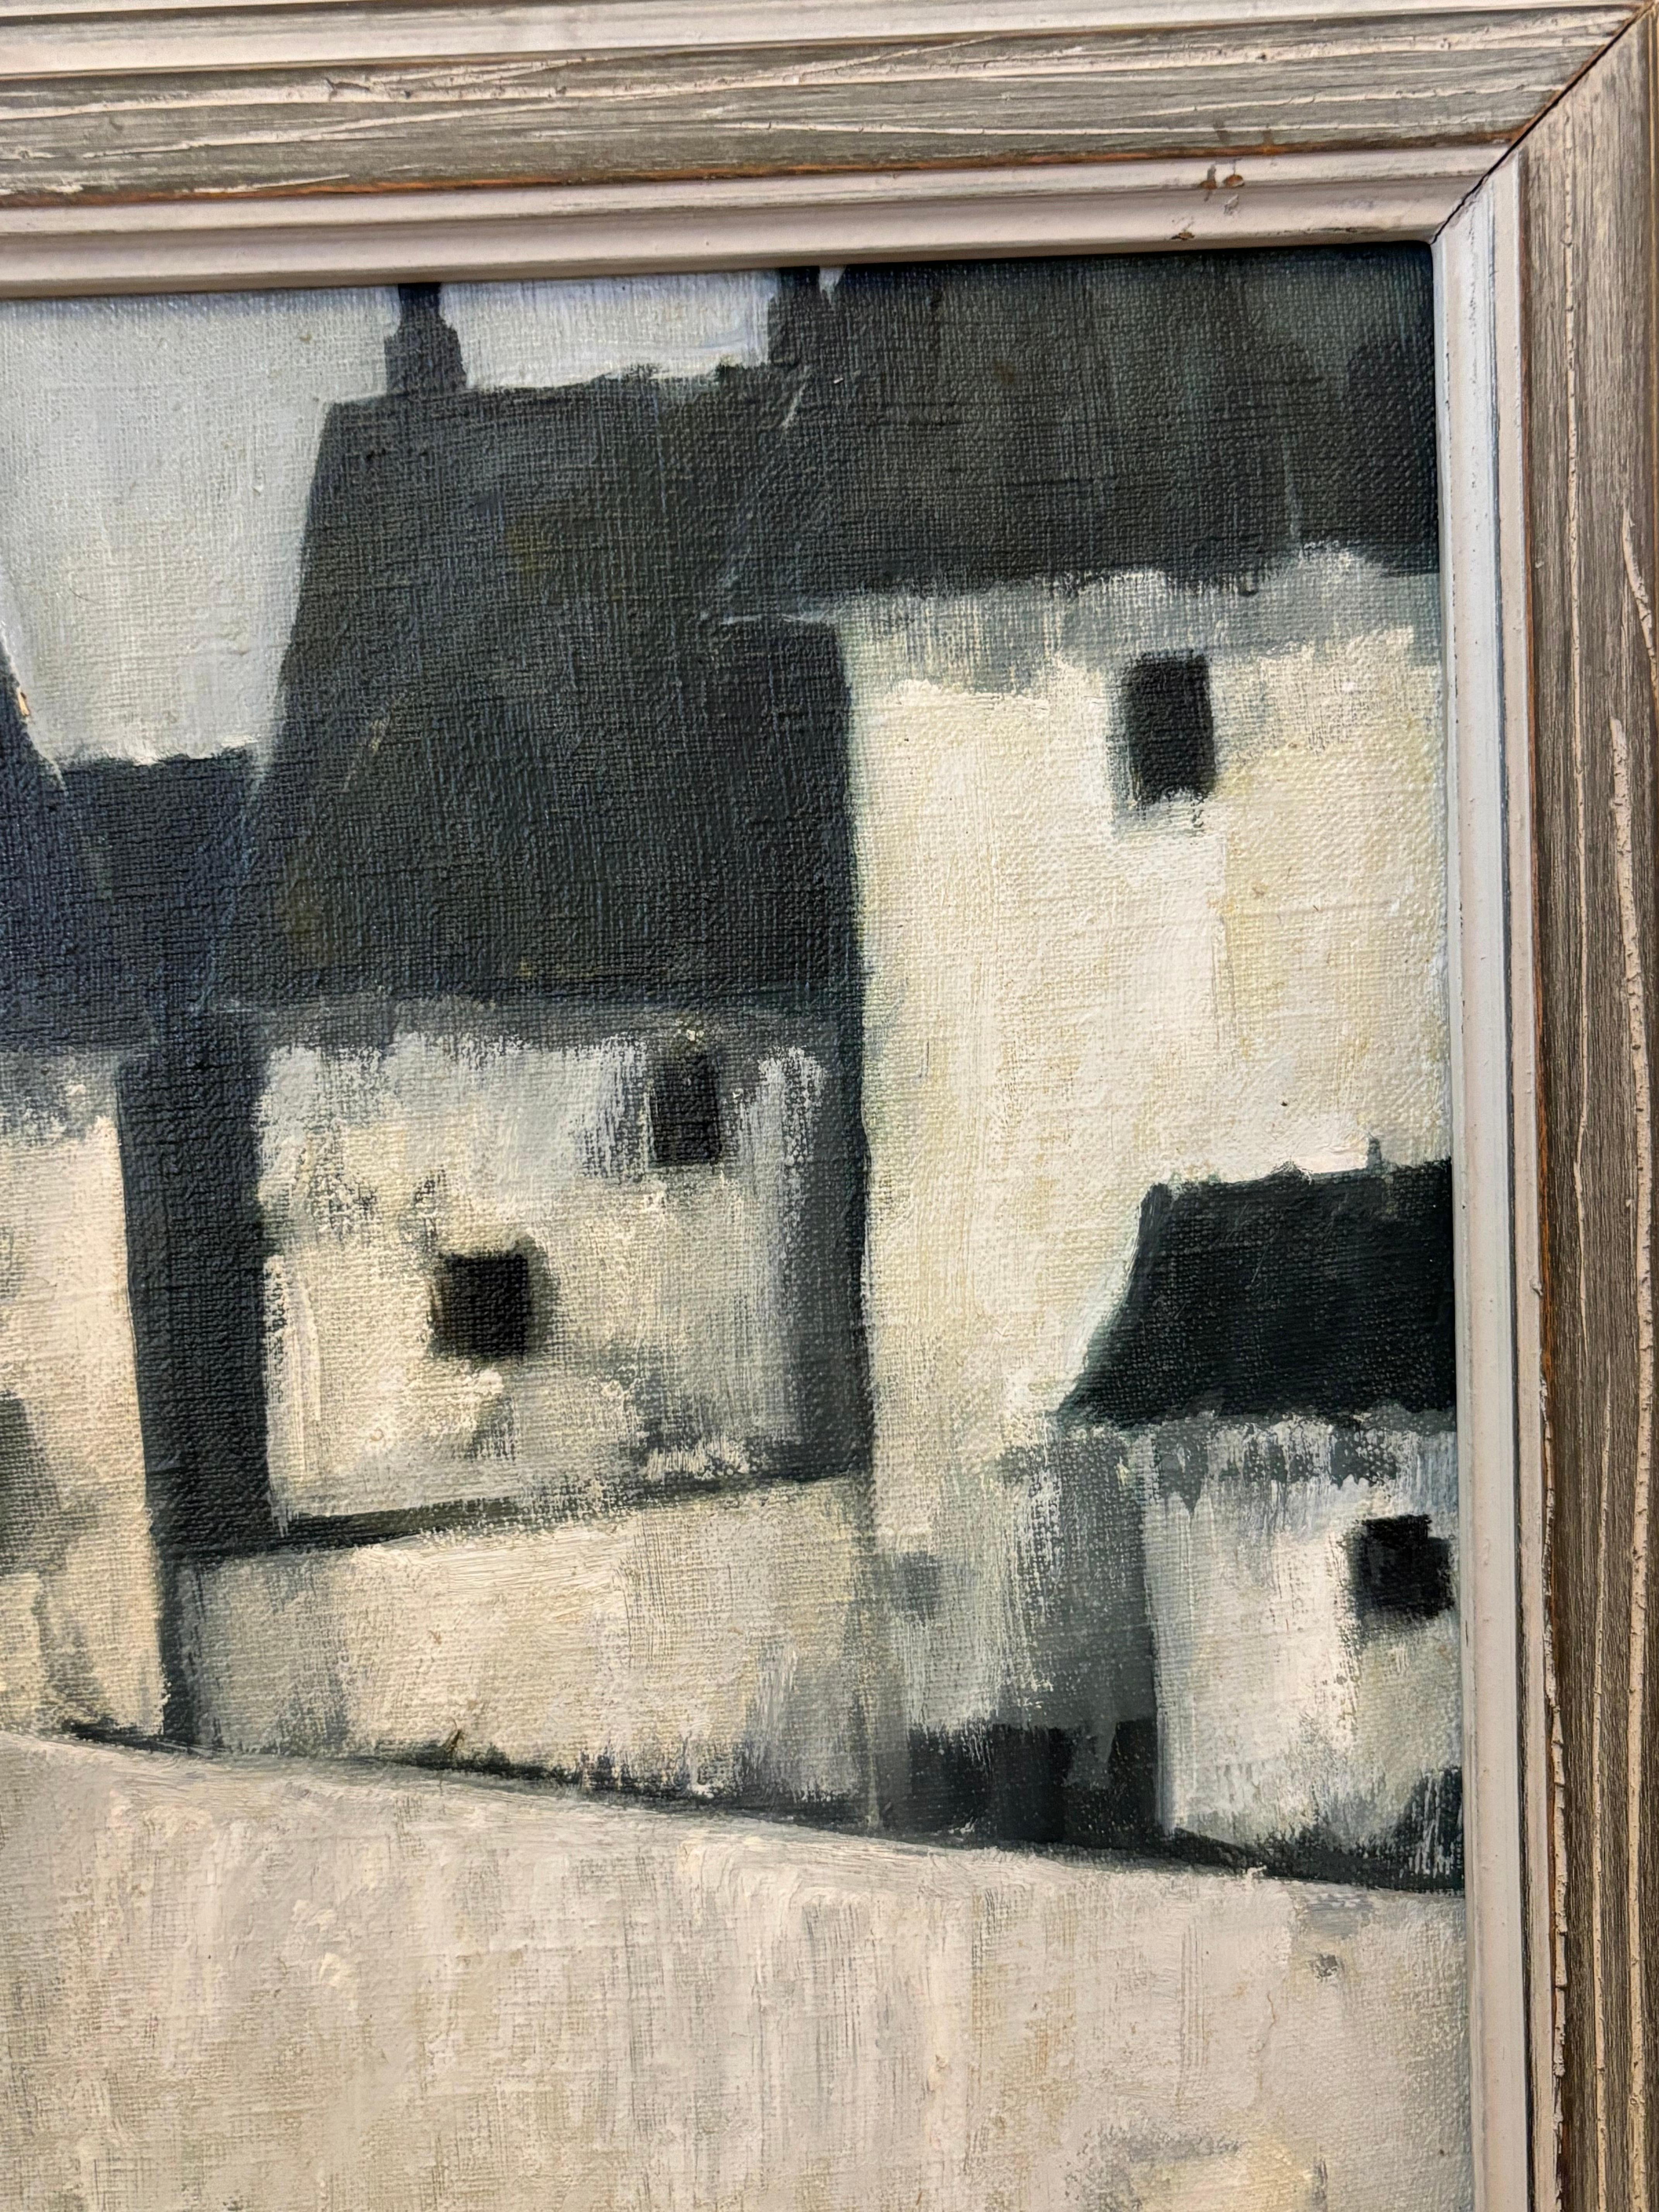 Merri Vetrano Oil on Canvas Cityscape.Done is shades of white, grays and blacks.  Nice small scale Cityscape, frame measures 17.5 square.  Overall in nice original condition with period frame.